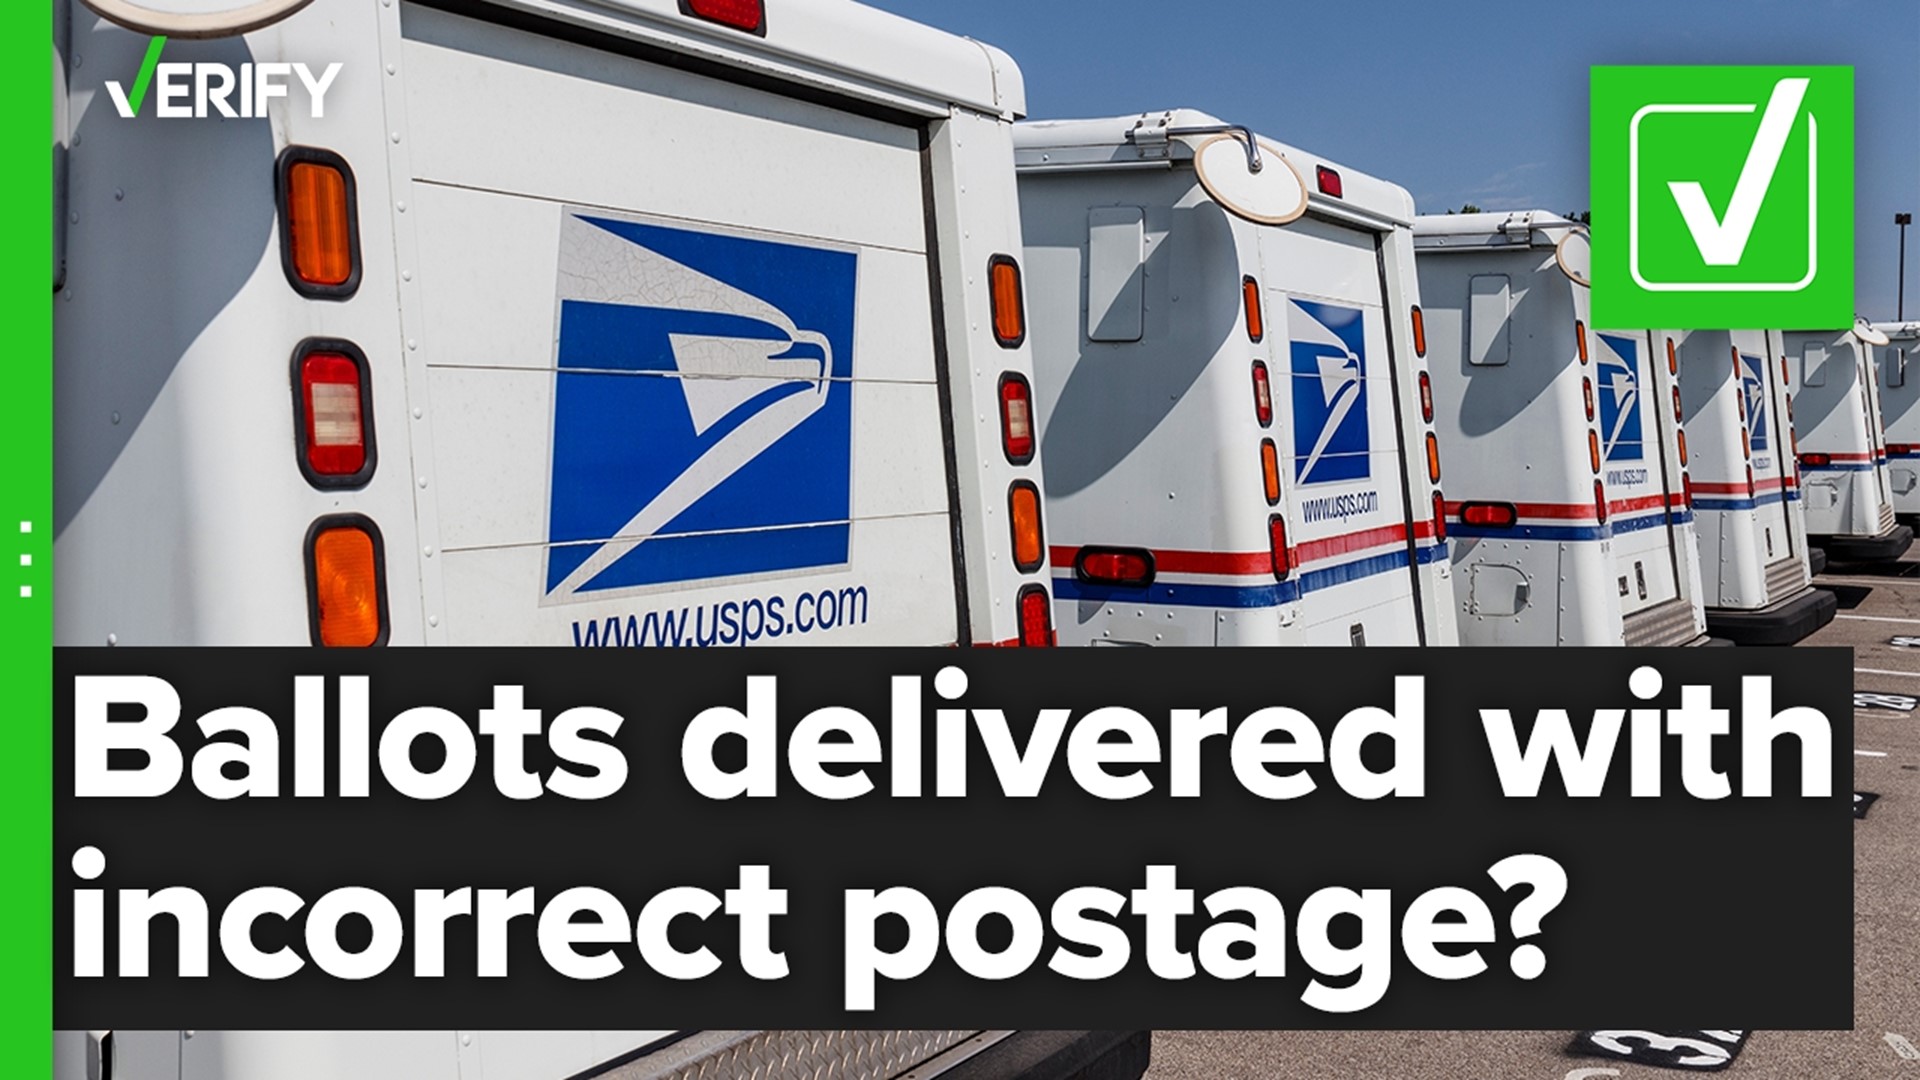 The United States Postal Service will deliver a mail-in ballot even if it has insufficient or unpaid postage because of a USPS policy that prioritizes election mail.